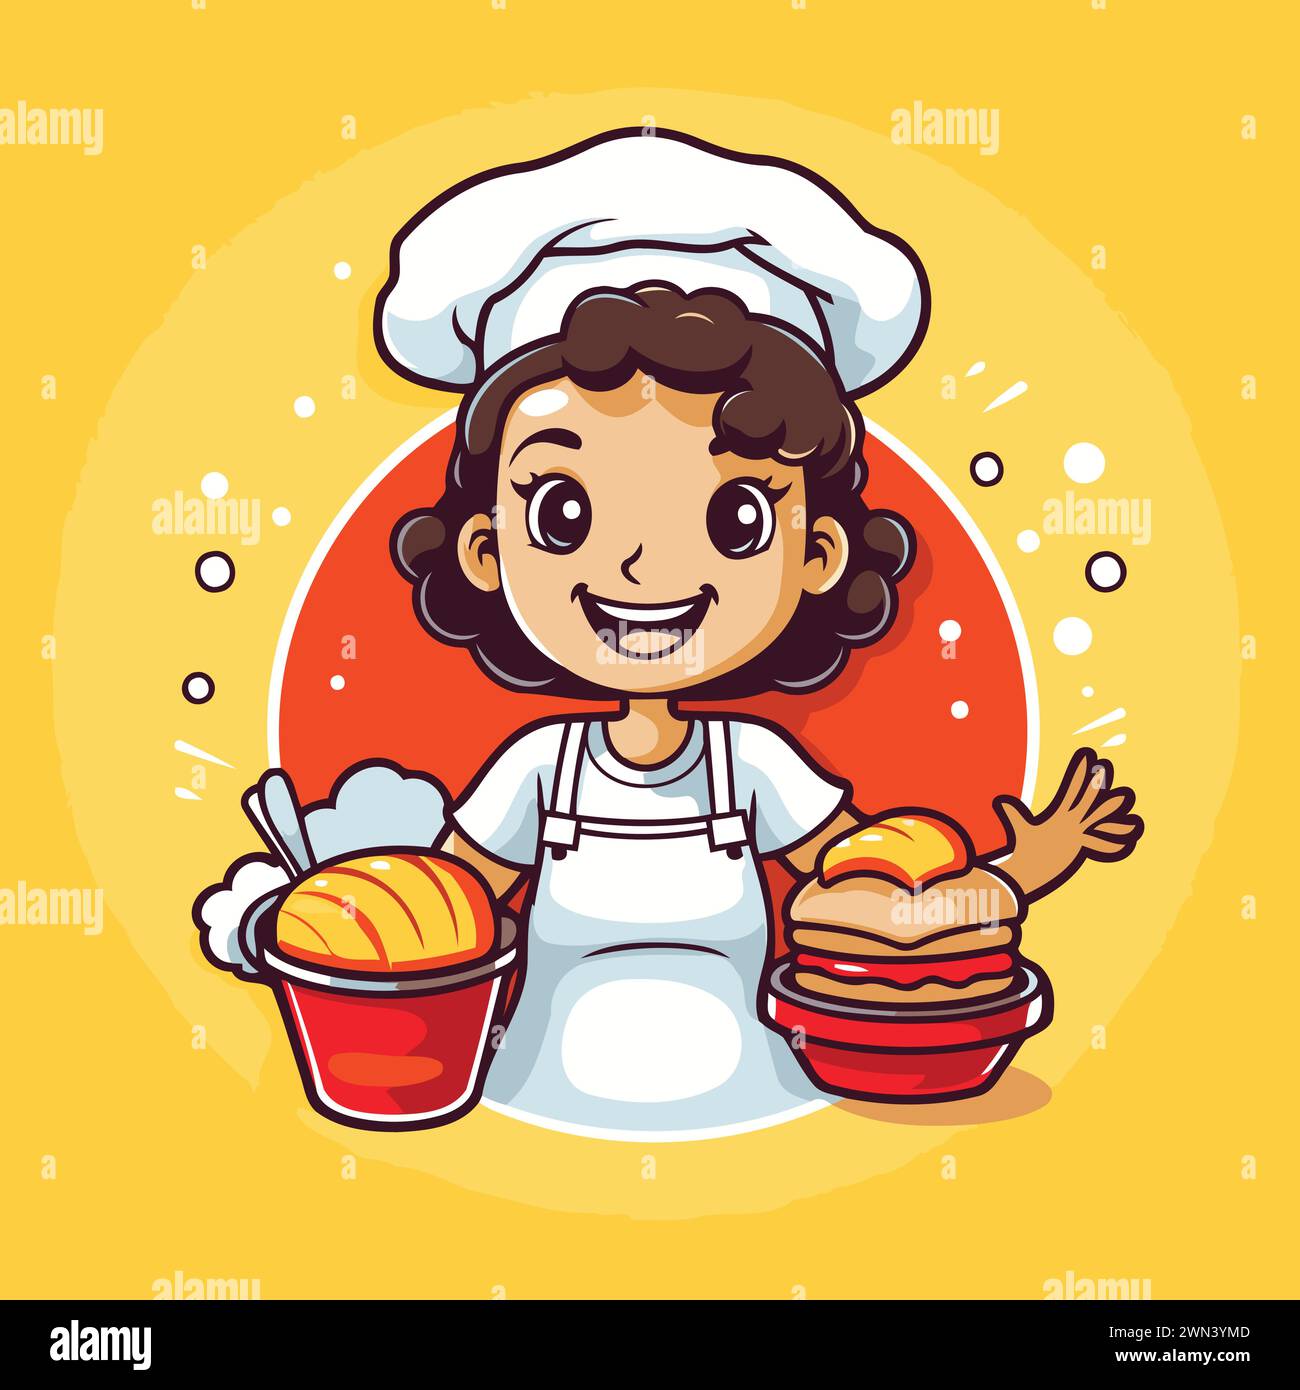 Cute little girl chef in uniform and hat. Vector illustration. Stock Vector